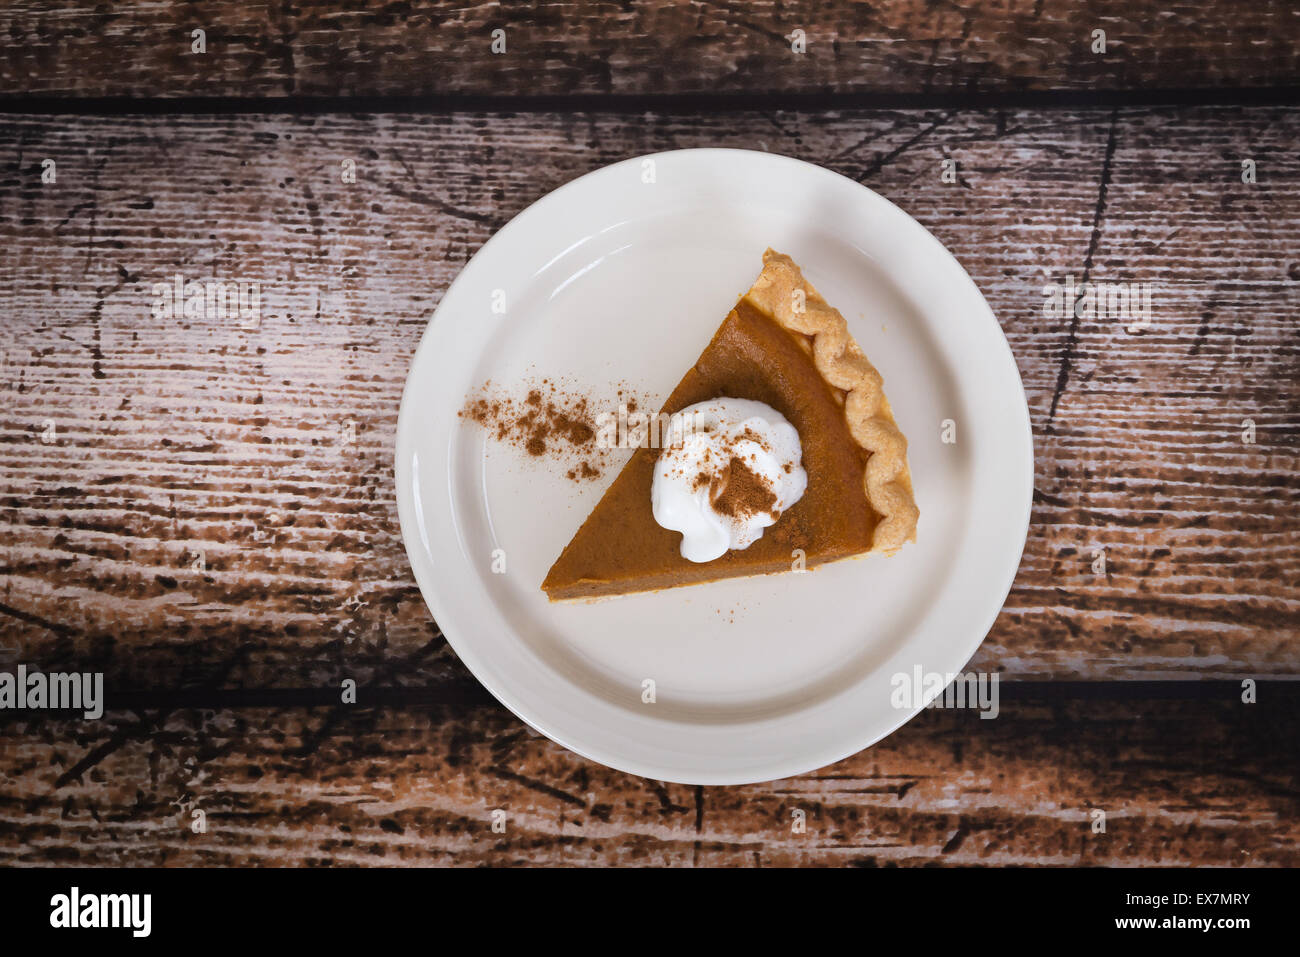 Slice of a pumpkin pie on wooden vintage table Stock Photo